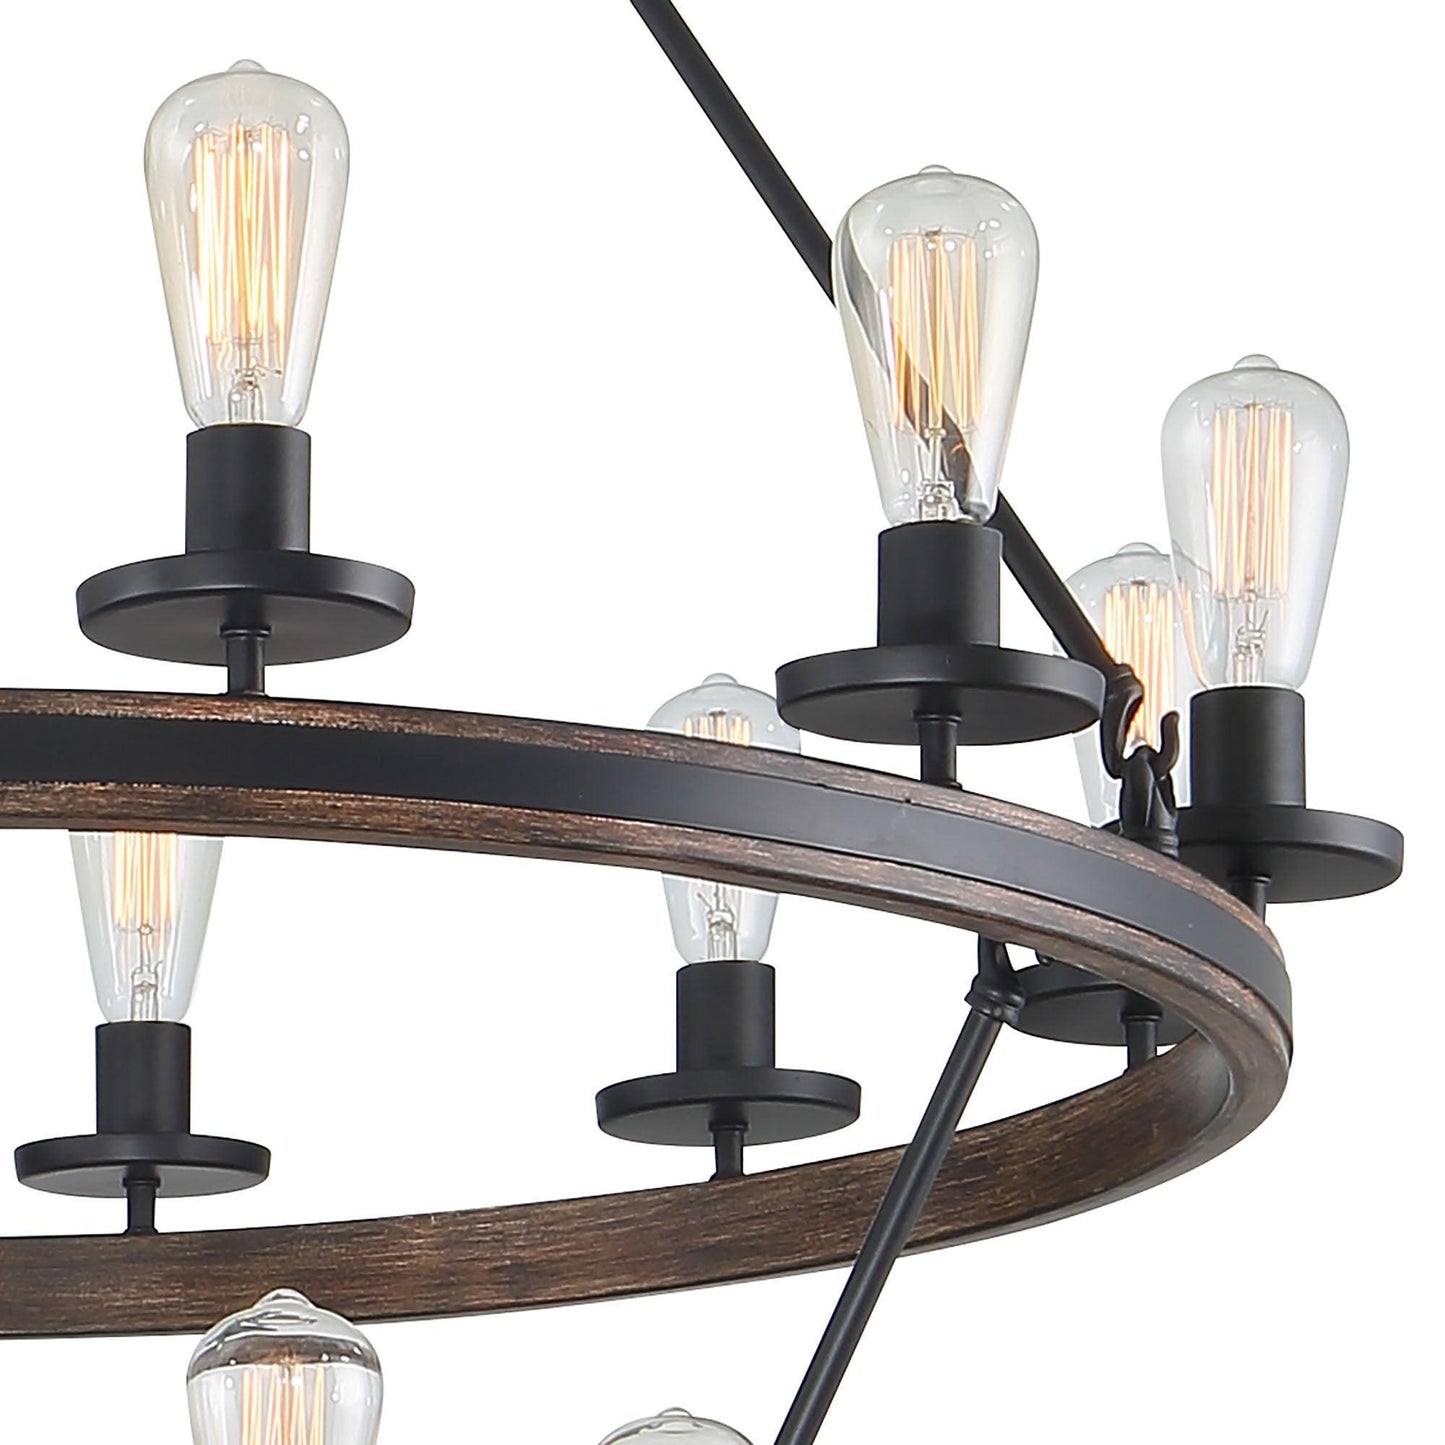 1218 | 18 - Light Candle Style Tiered Chandelier by ACROMA™  UL - ACROMA